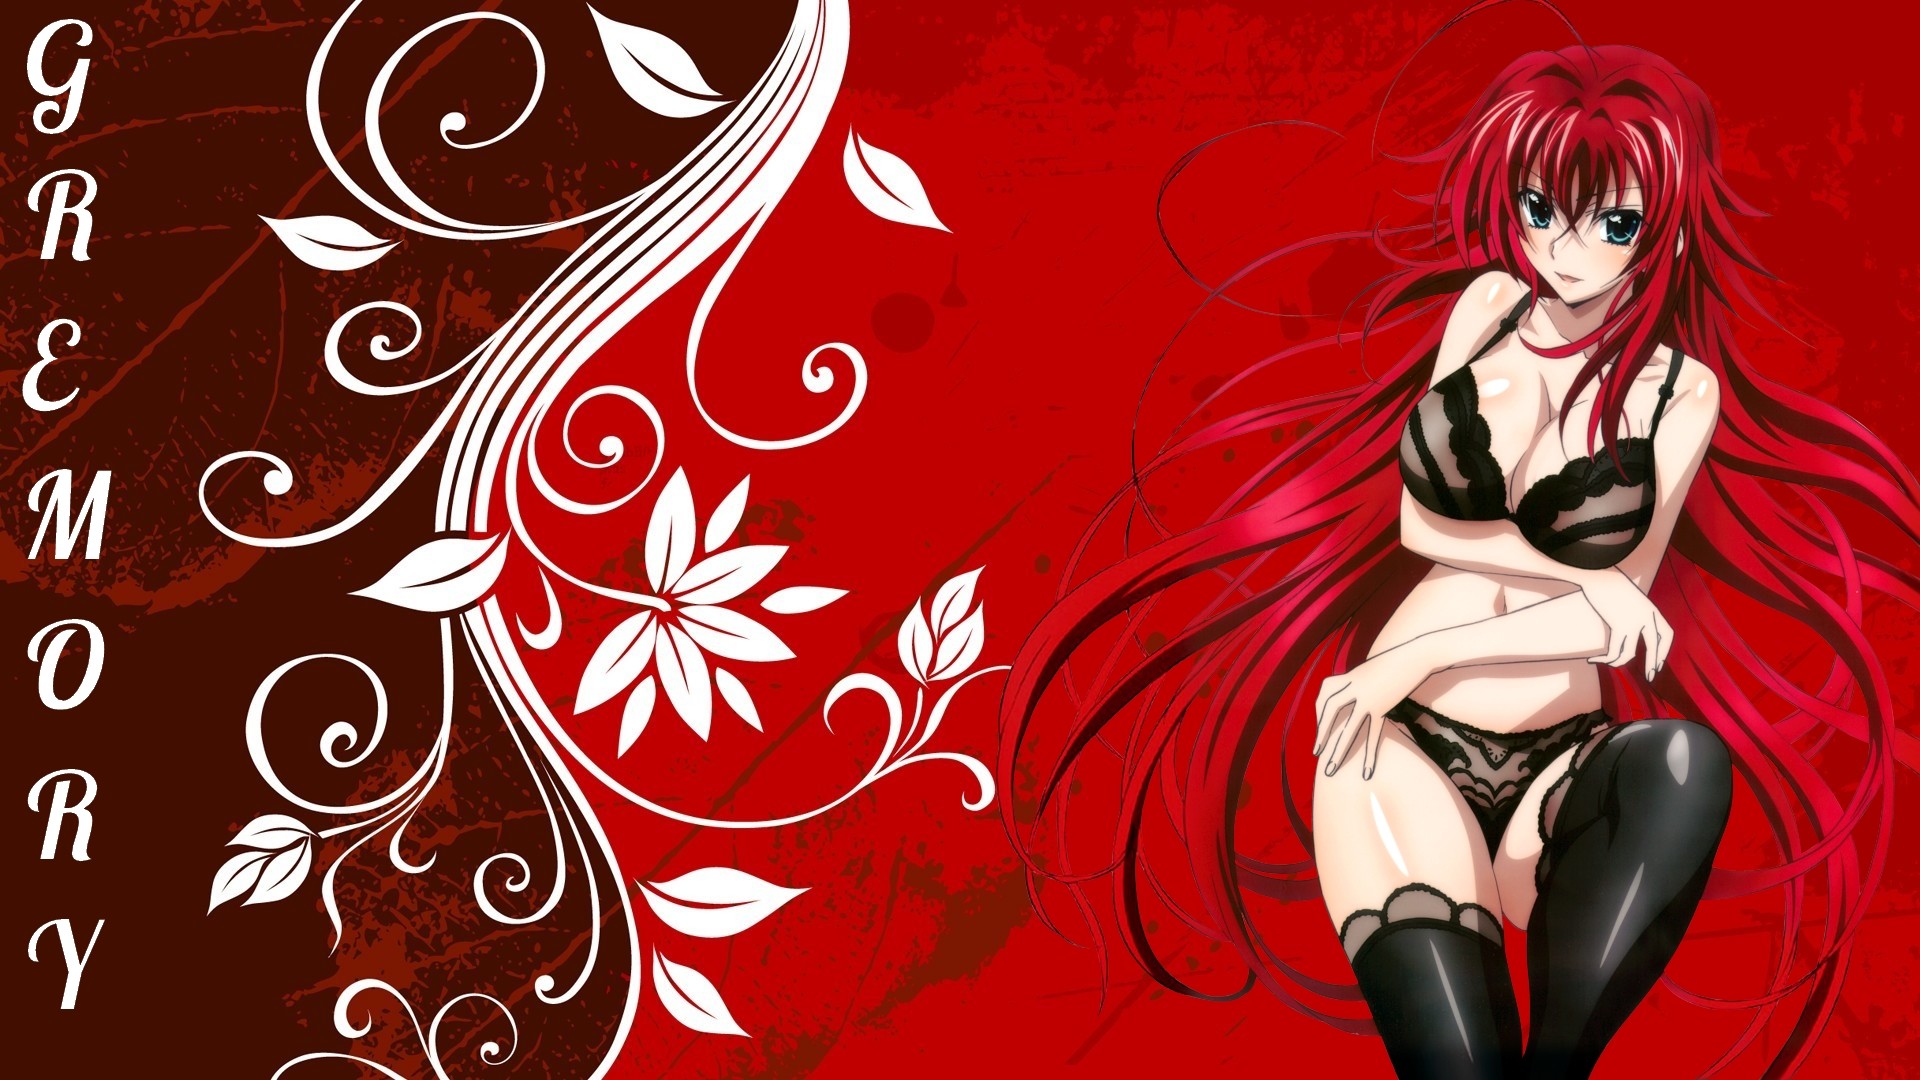 1920x1080 ... RIAS GREMORY- High School DxD WALLPAPER  by Say0chi on .